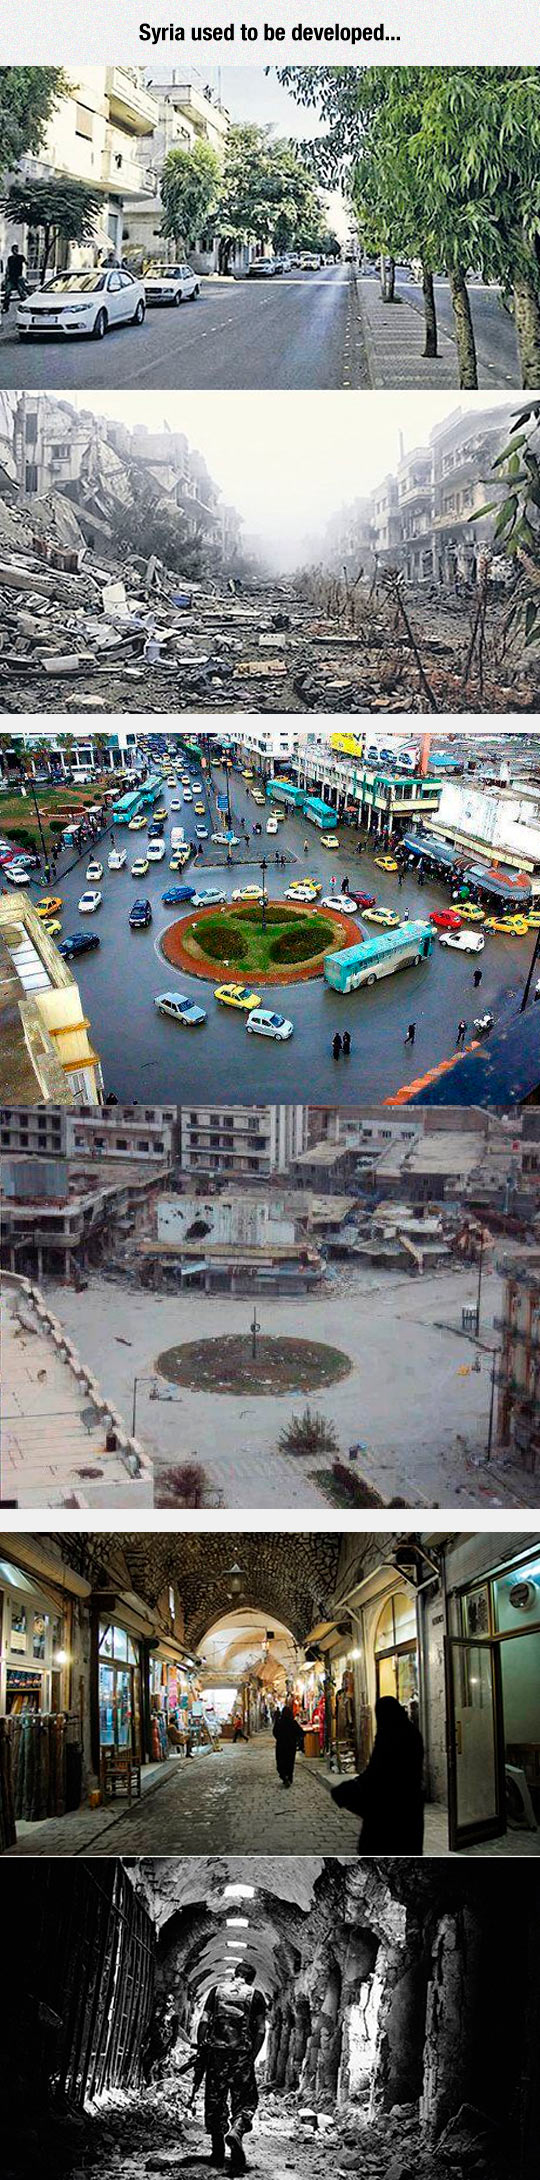 Syria Was A Beautiful City